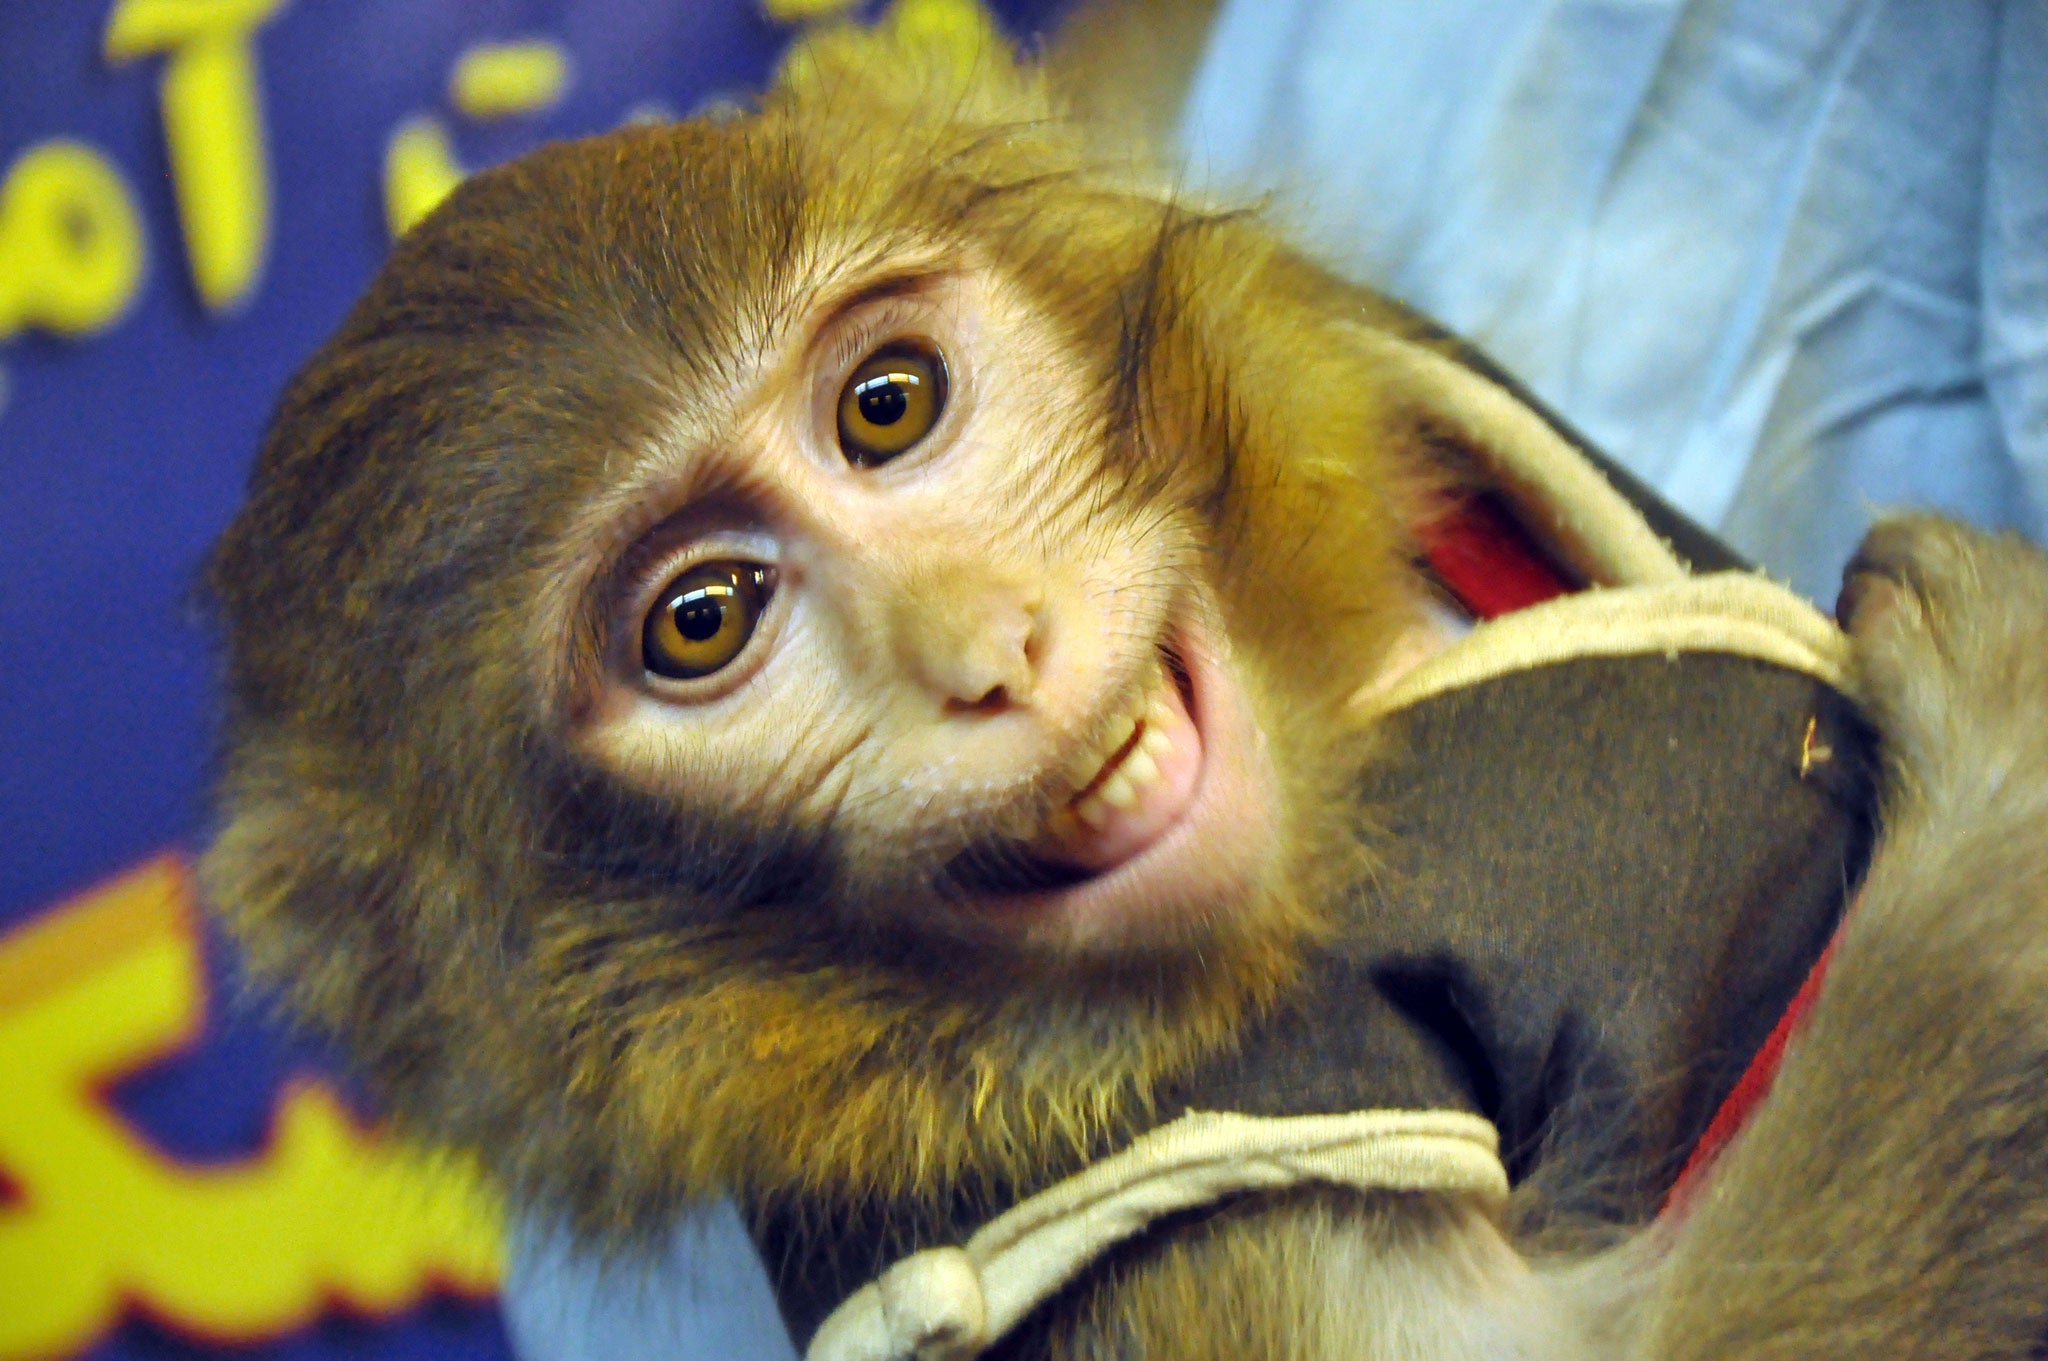 This was the monkey Iran allegedly sent into space